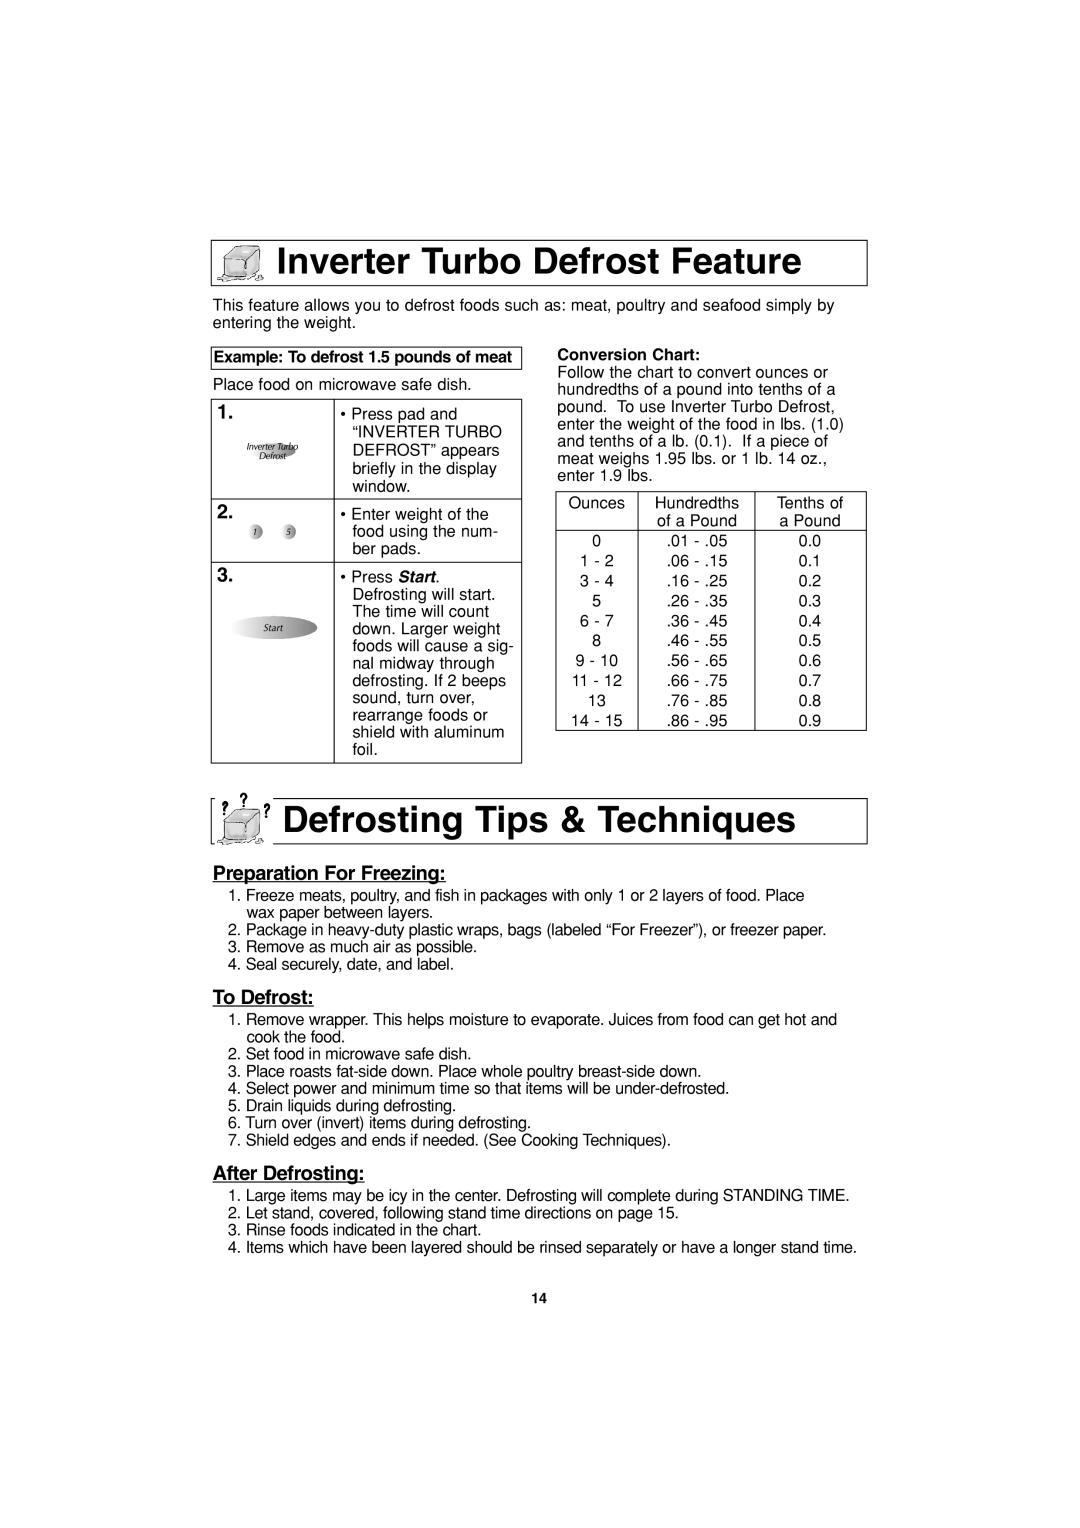 Panasonic NN-T793 Inverter Turbo Defrost Feature, Defrosting Tips & Techniques, Preparation For Freezing, To Defrost 